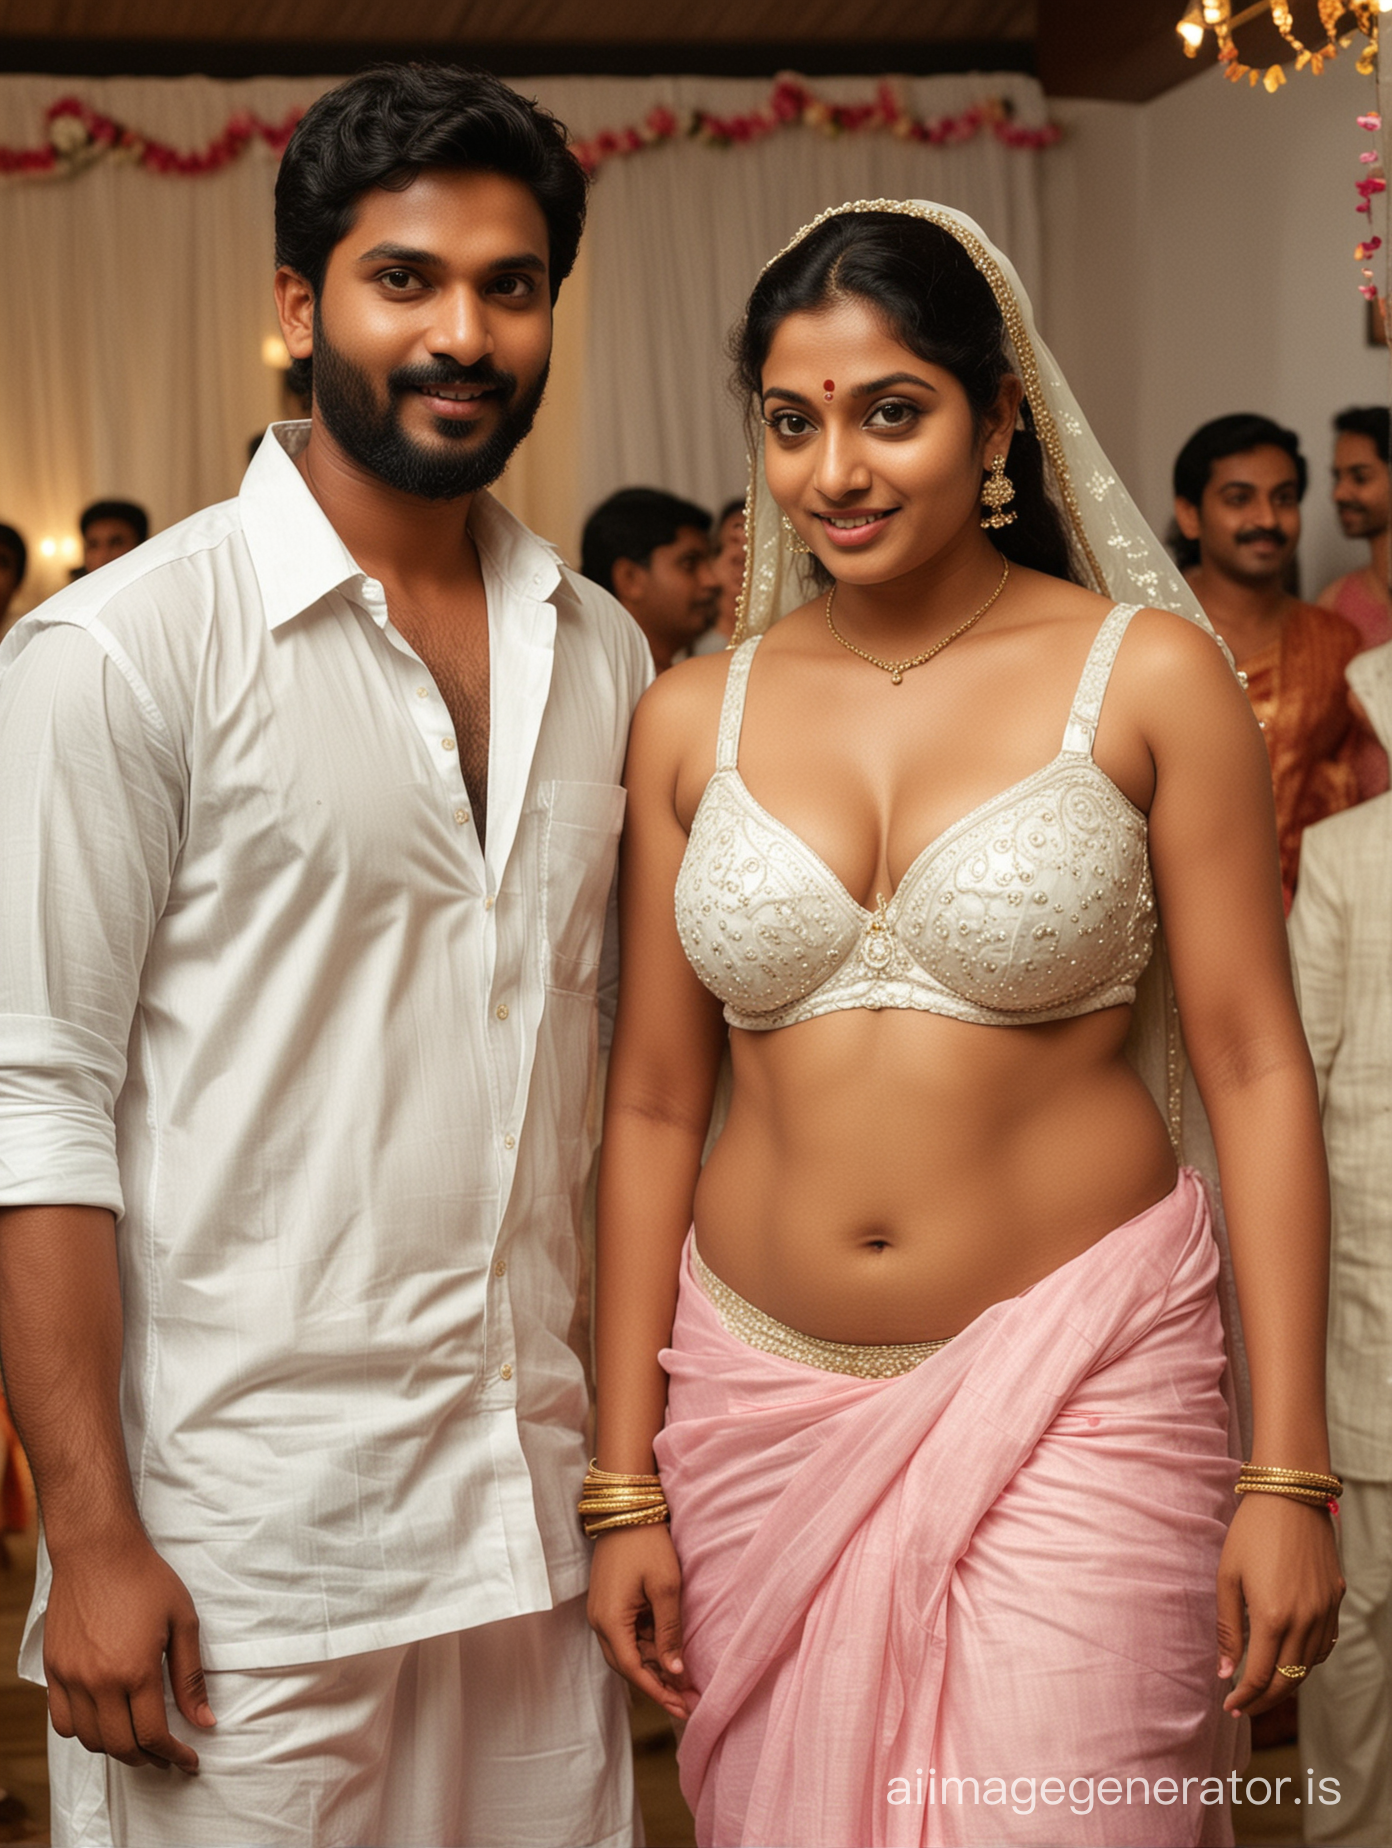 A kerala party. The man is a 30 year old kerala boy. The boy is dressed in veshti and shirt. The bride is kerala woman who looks 99% like malayalam movie actress samyukta varma. The woman is wearing bra and thong. Woman has big boobs and navel visible. 